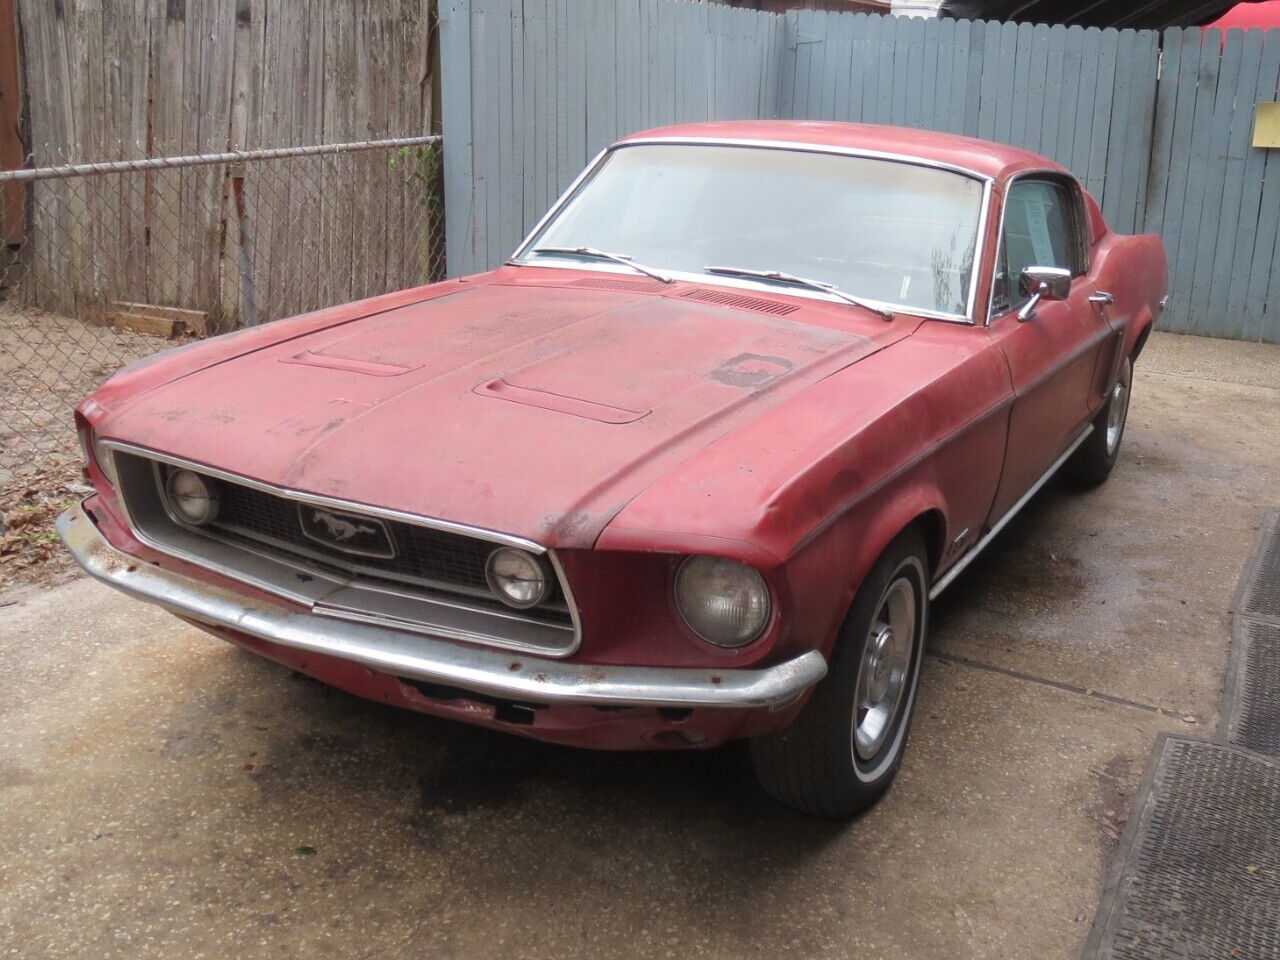 Ford Mustang GT 390 1968